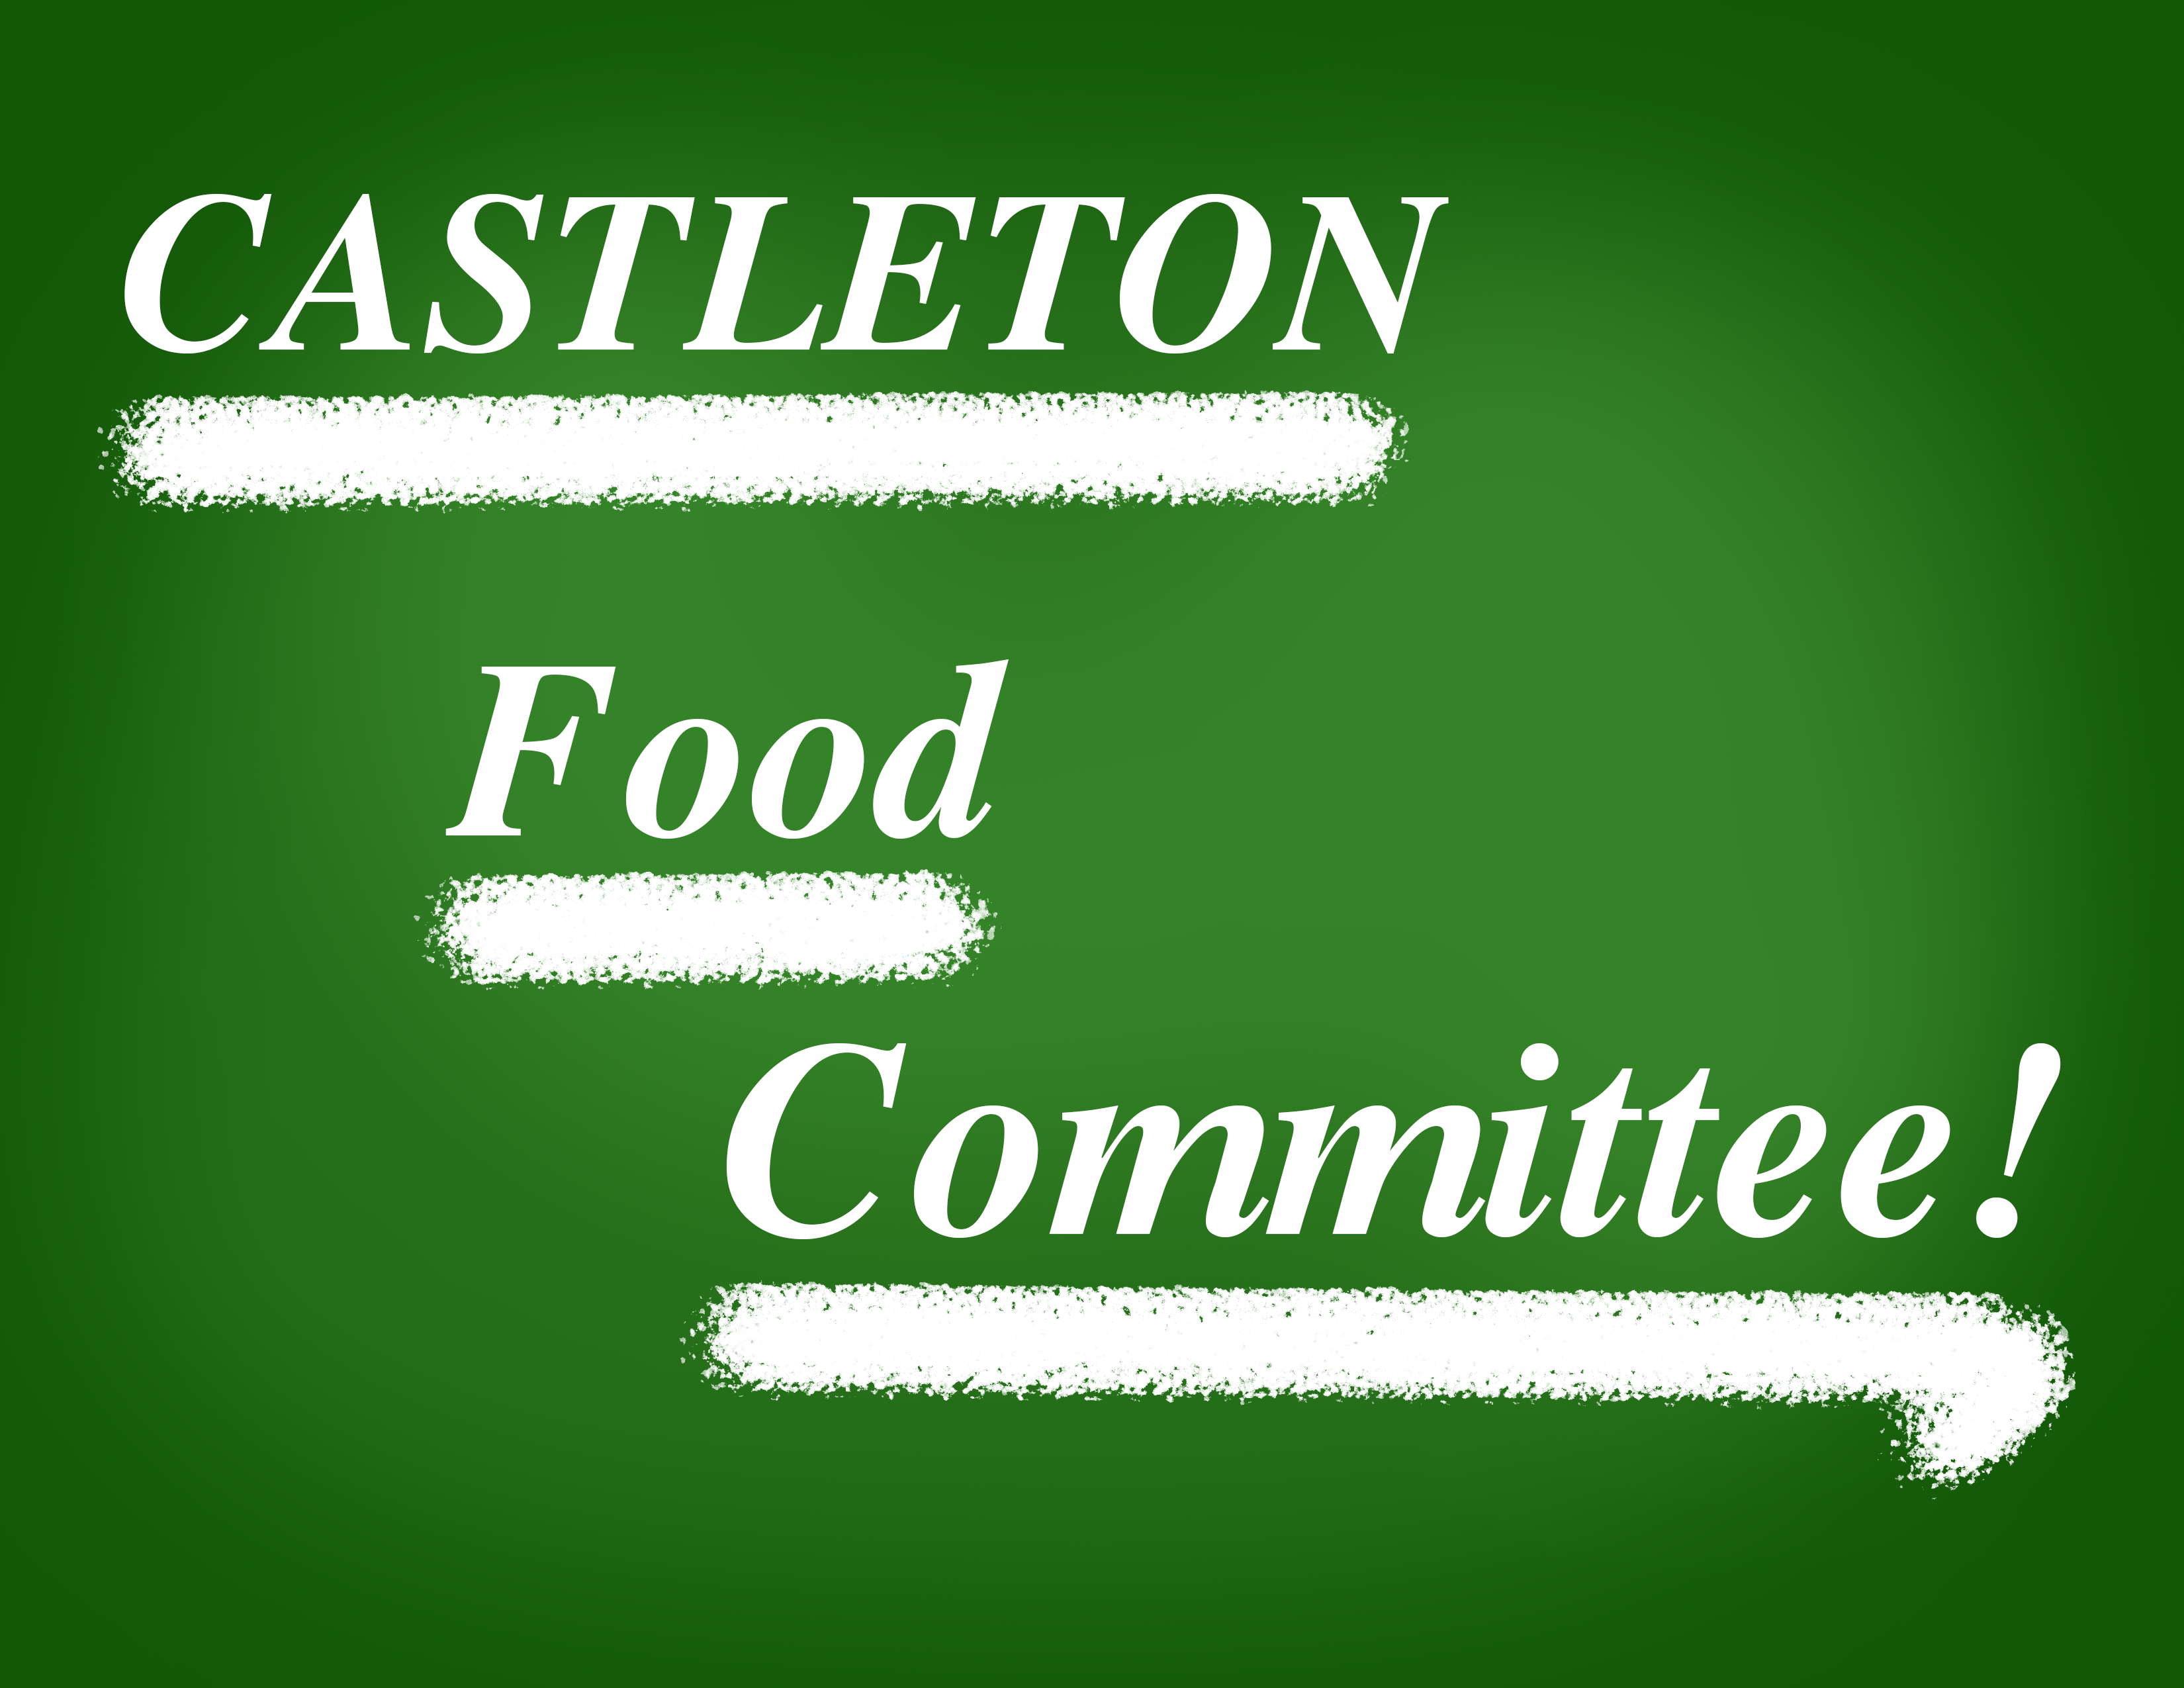 Join the Castleton Food Committee!